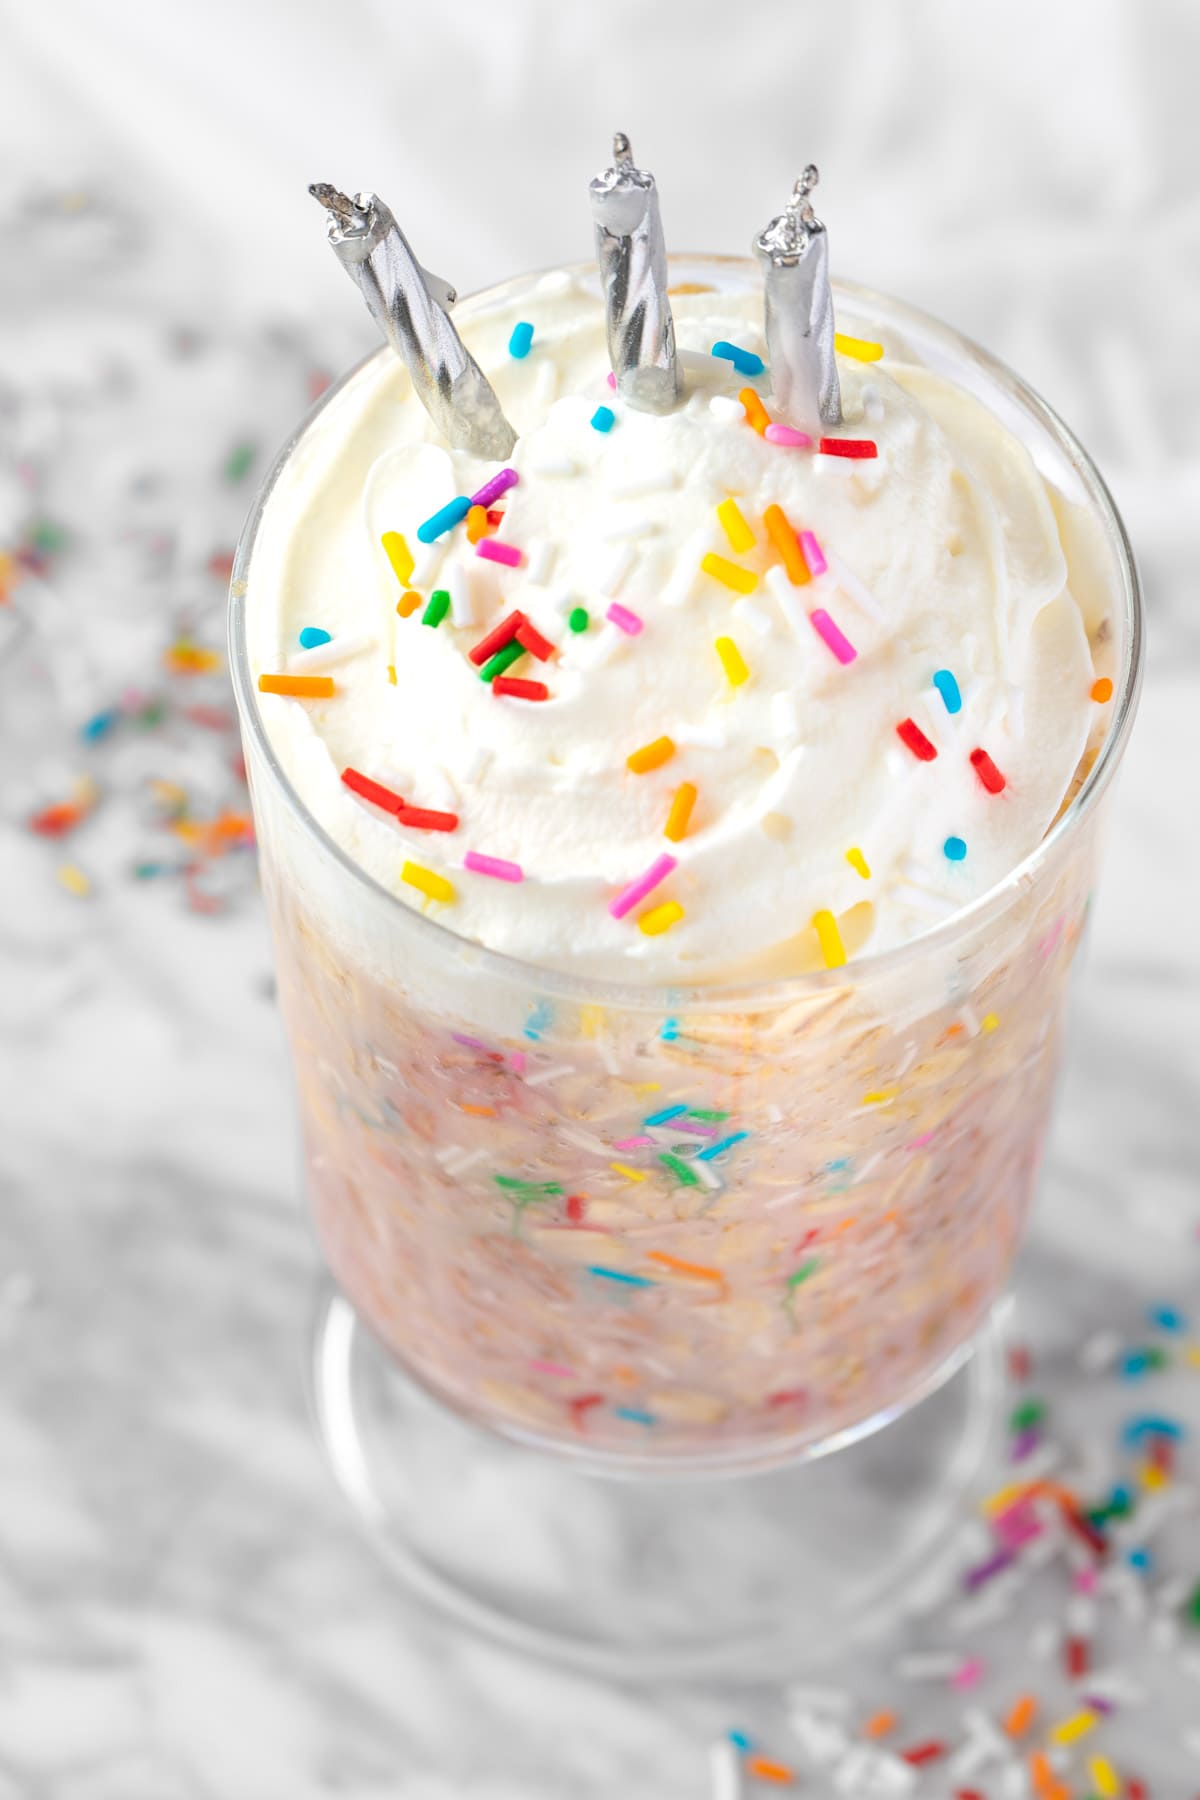 Cake batter oats with multicolored sprinkles, topped with whipped cream and silver candles.